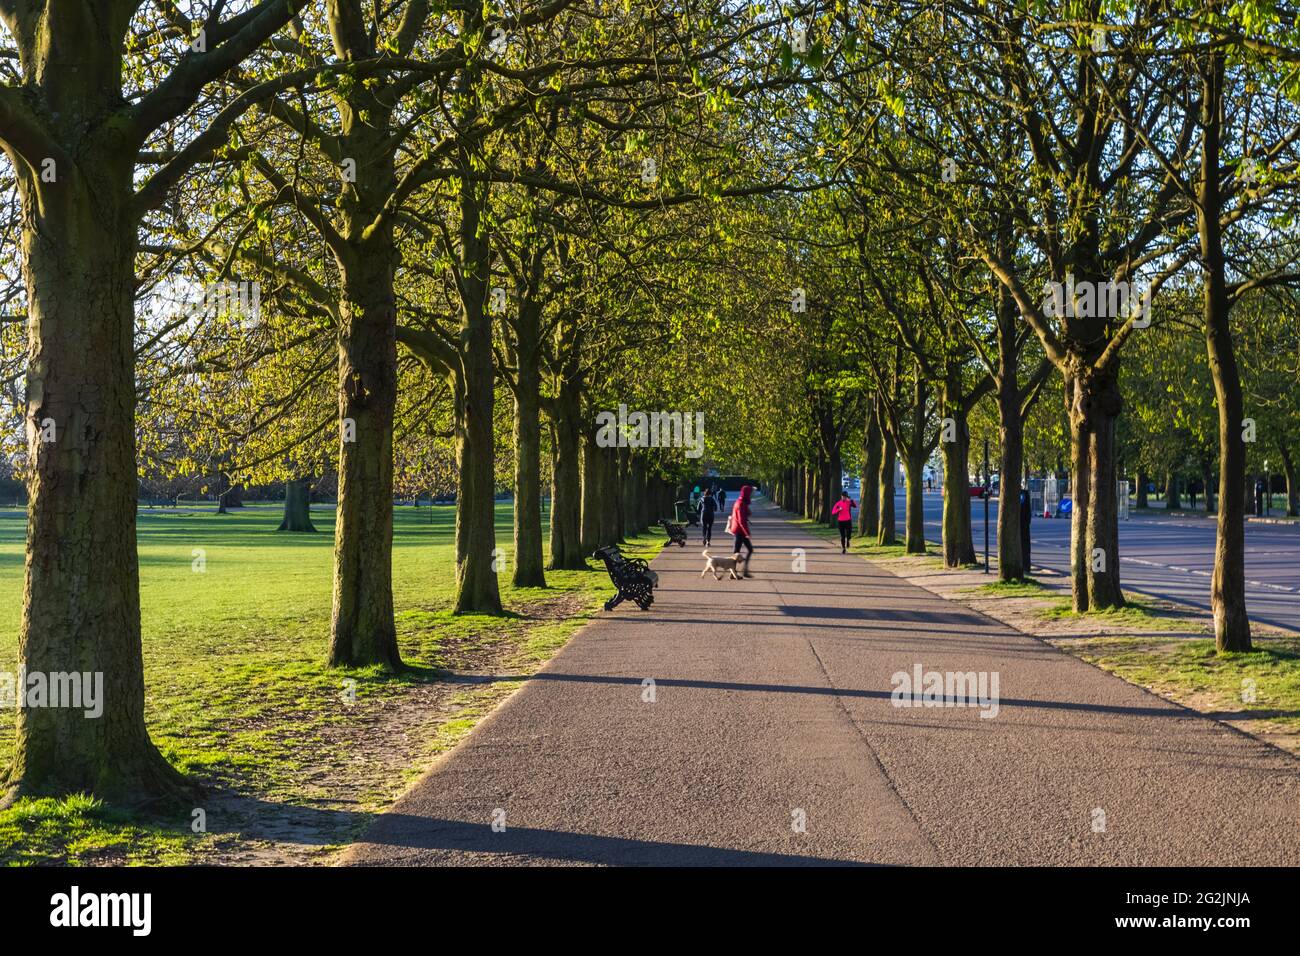 England, London, Greenwich, Greenwich Park, Avenue of Trees Stock Photo